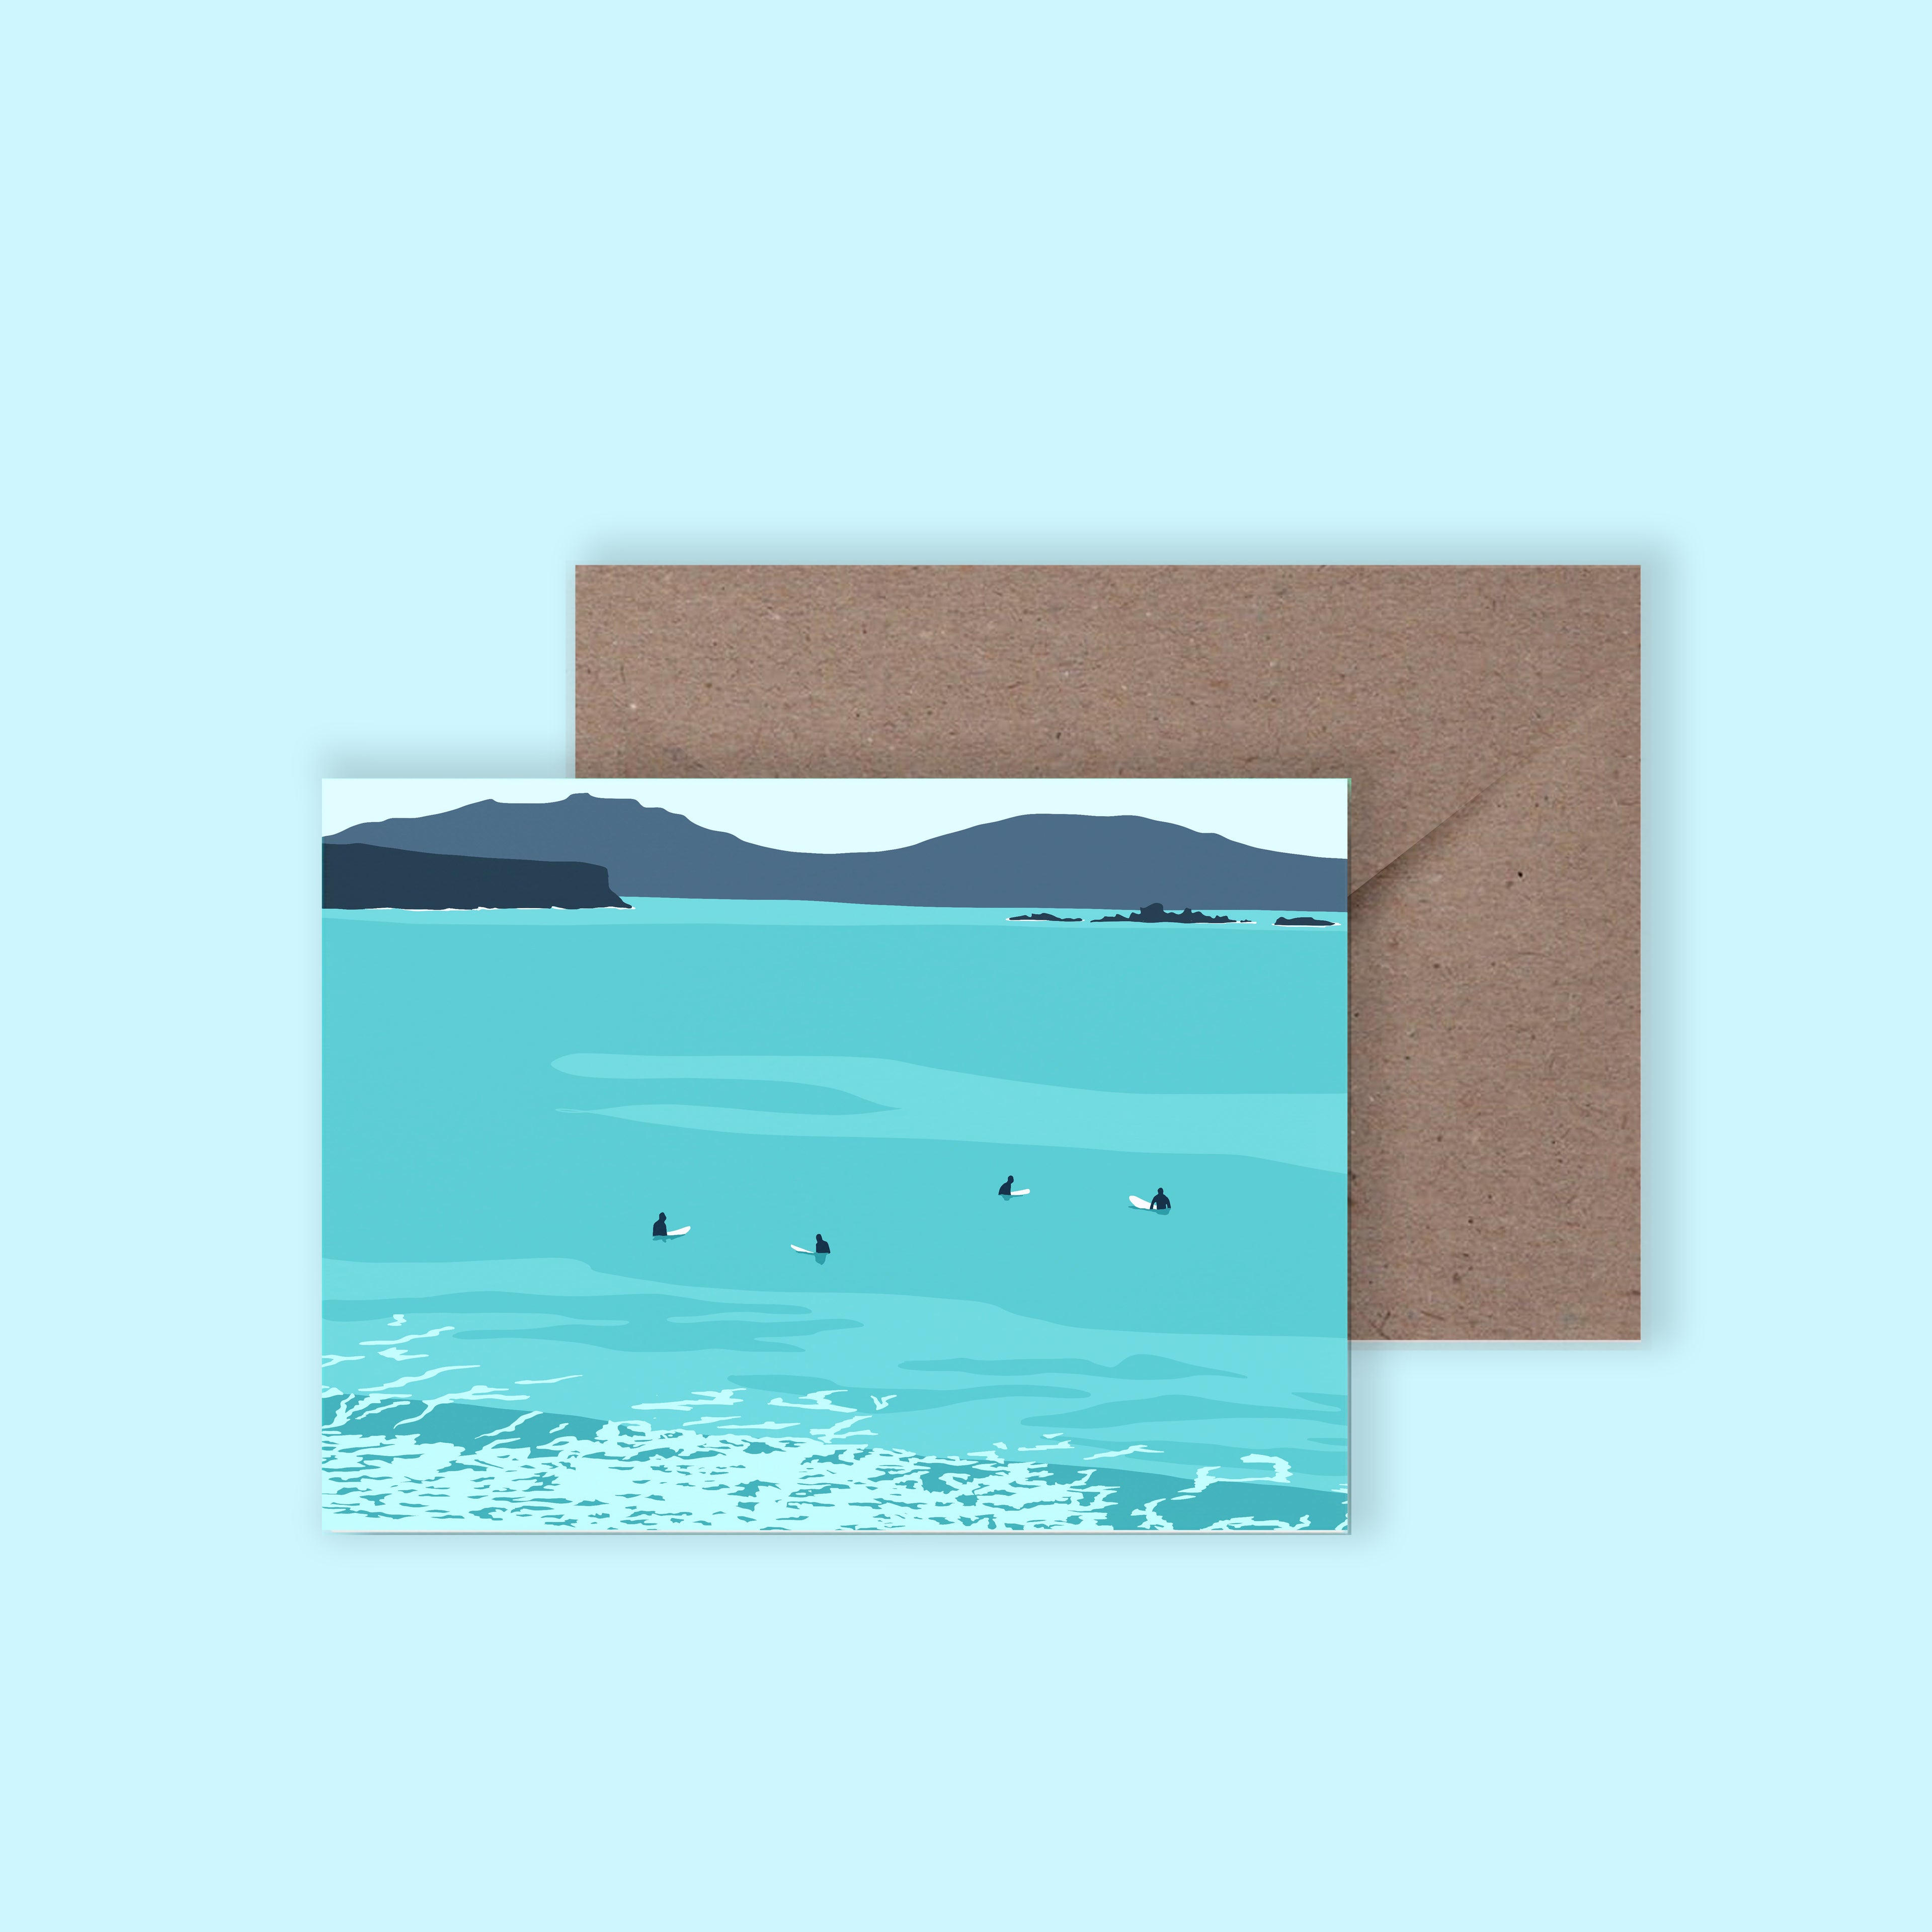 A mockup of a greeting card with an illustration of surfers sat on their surfboards, with a brown envelope behind on a light blue background.